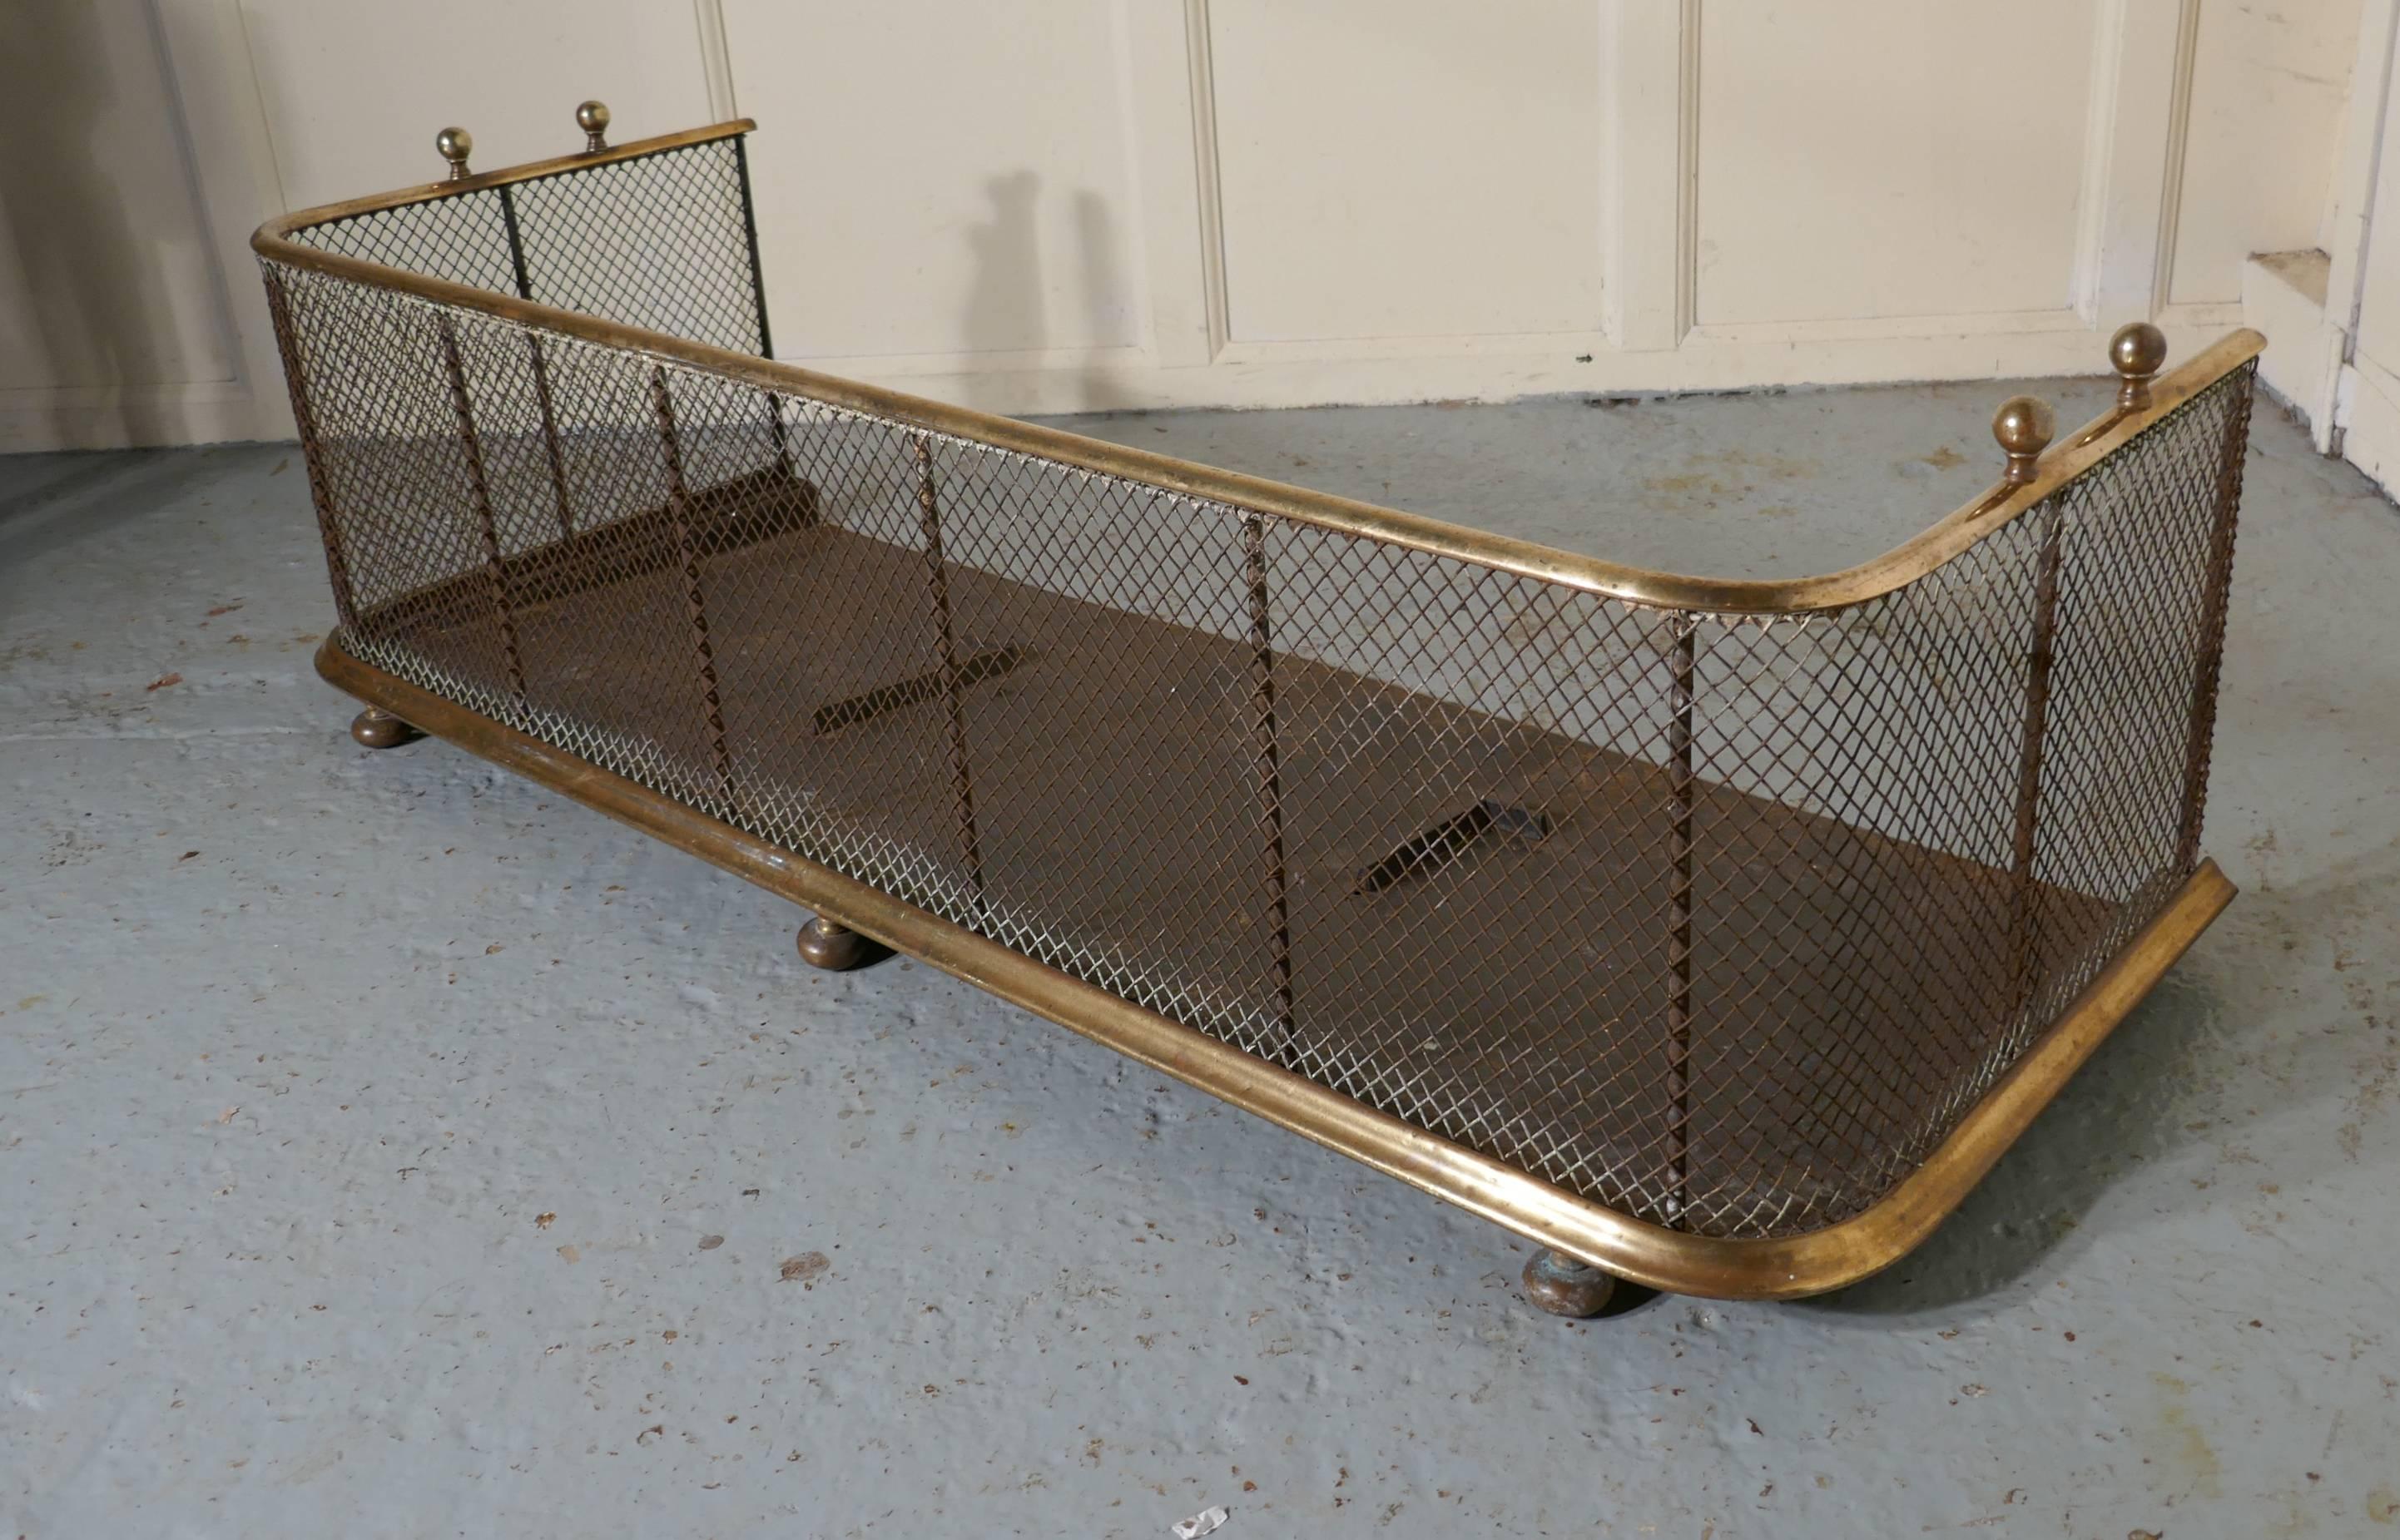 A large Victorian brass and iron fender or fireguard.
 
This is a very heavy quality Victorian antique fire guard, the iron guard has wire mesh and brass rails top and bottom, it has brass knobs on the top and it stands on brass feet, the fender